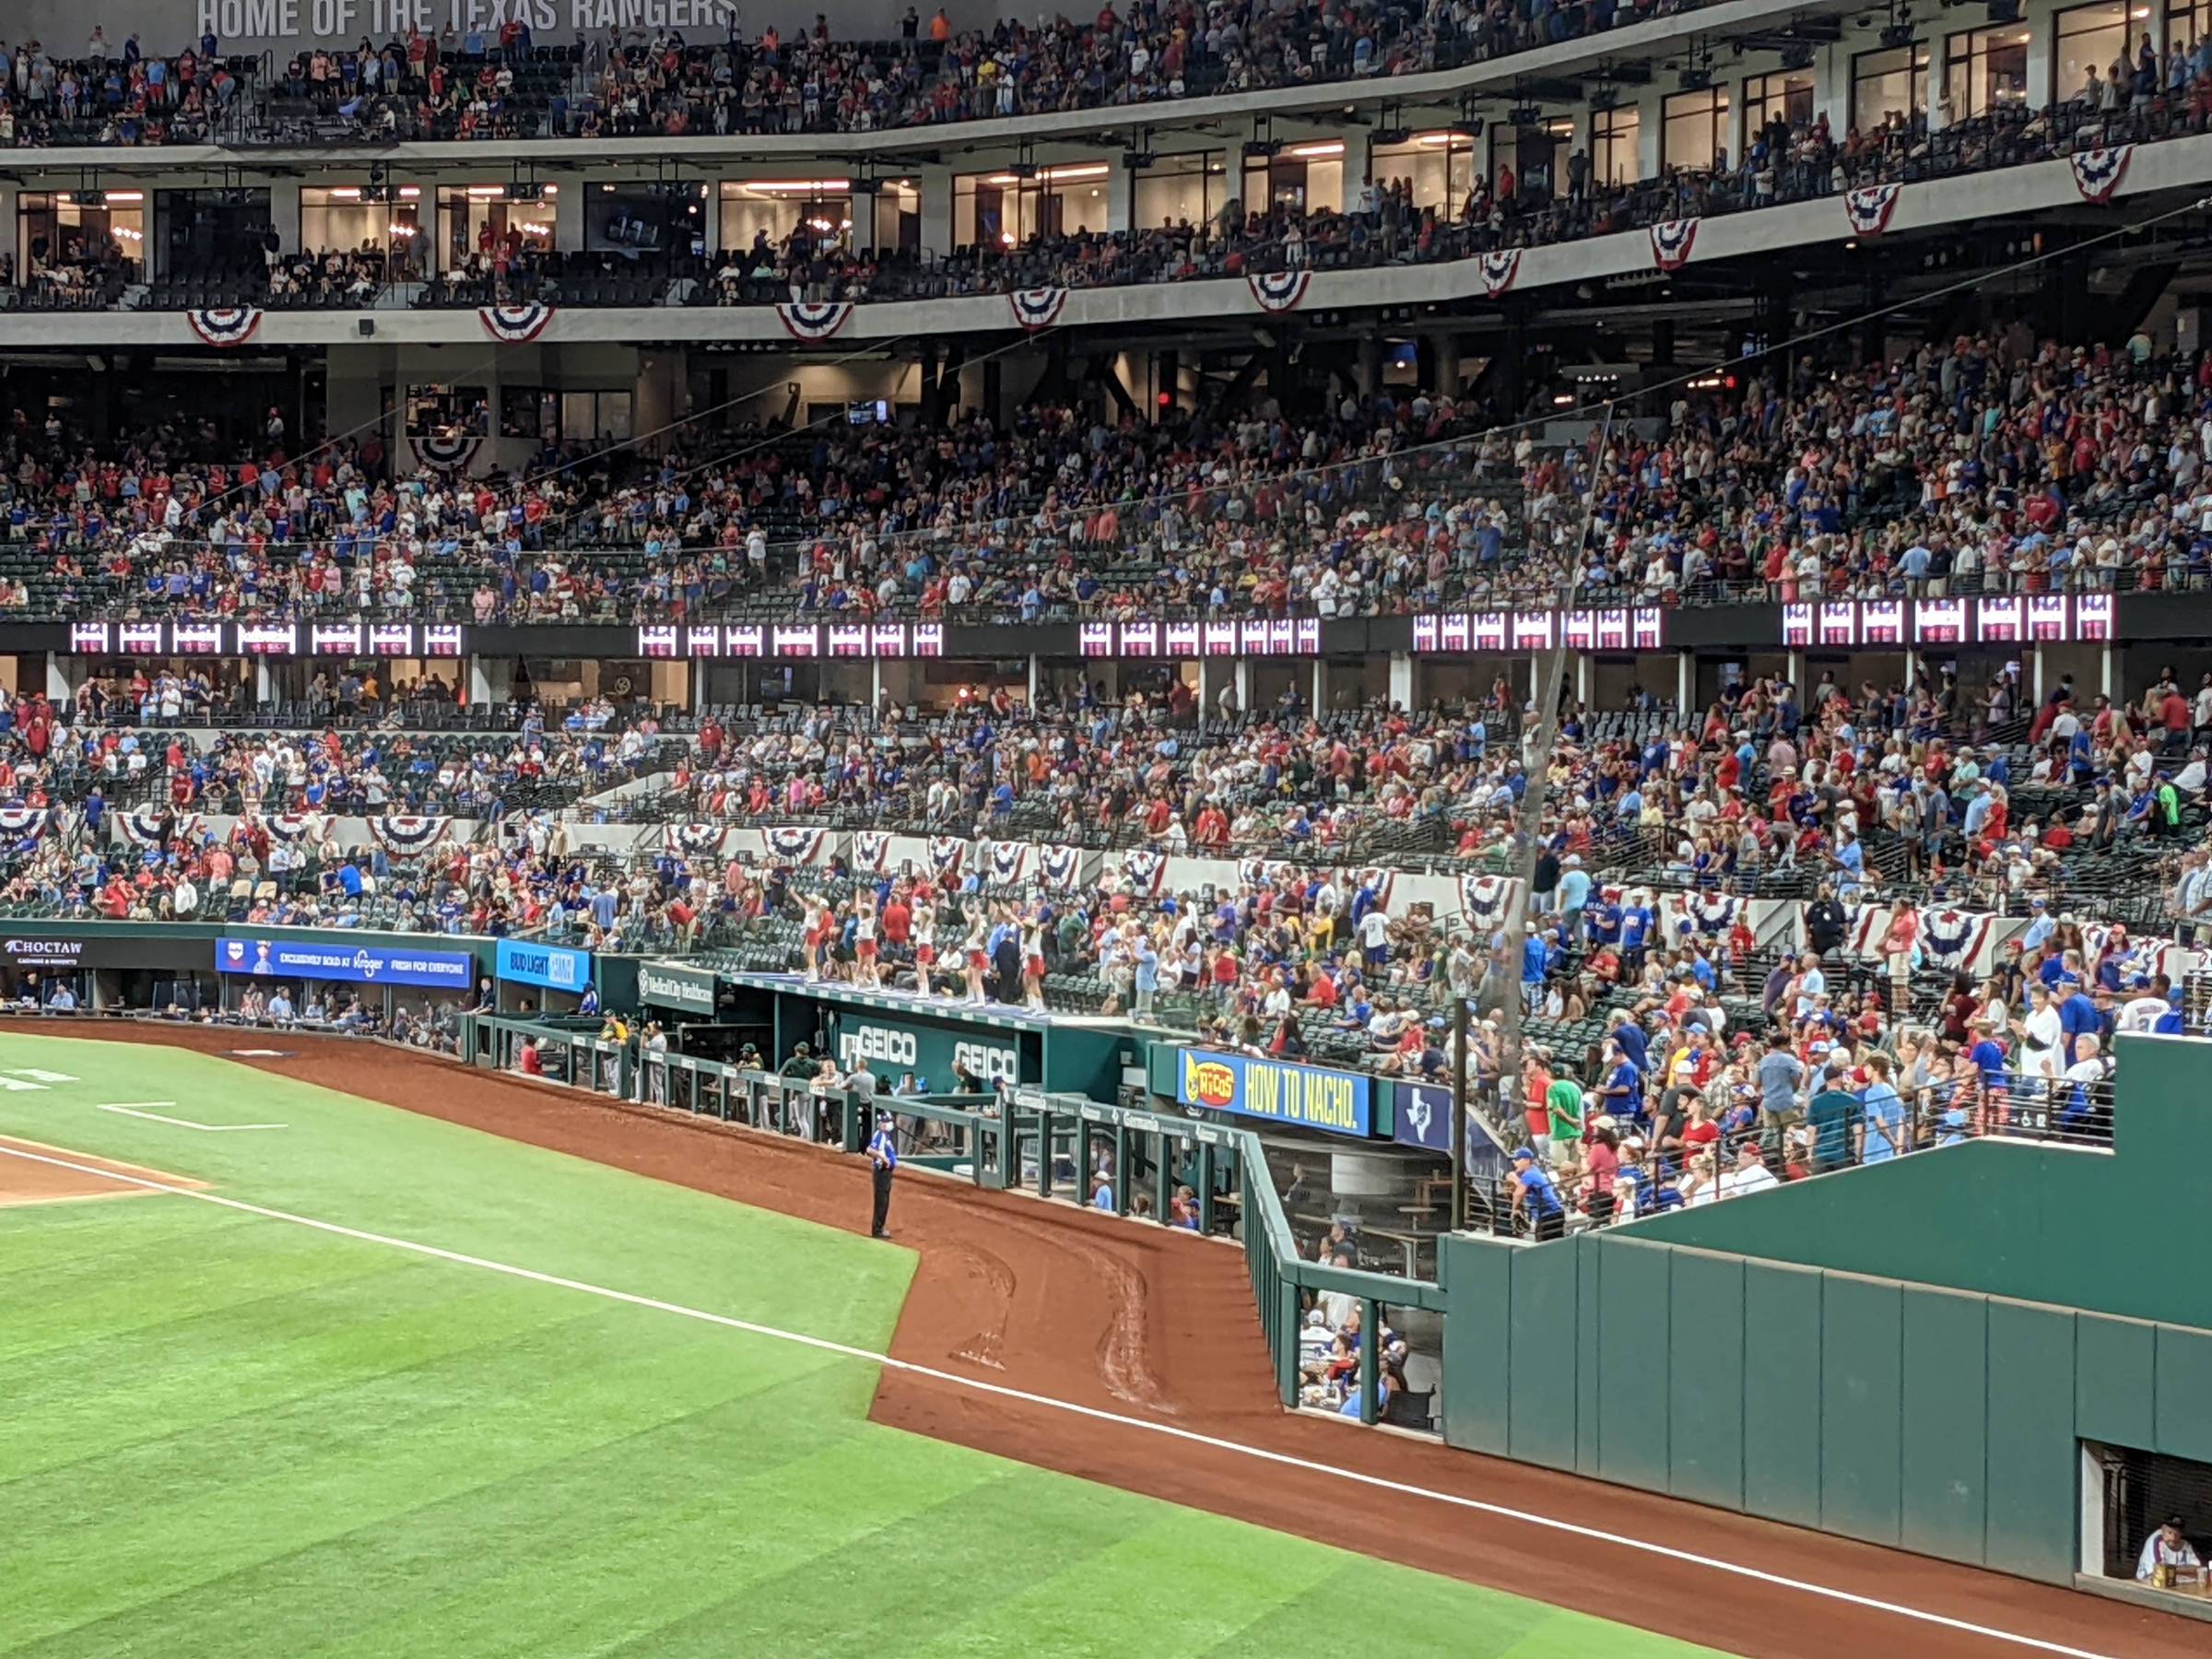 Shaded Seats at Globe Life Field - Rangers Tickets in the Shade